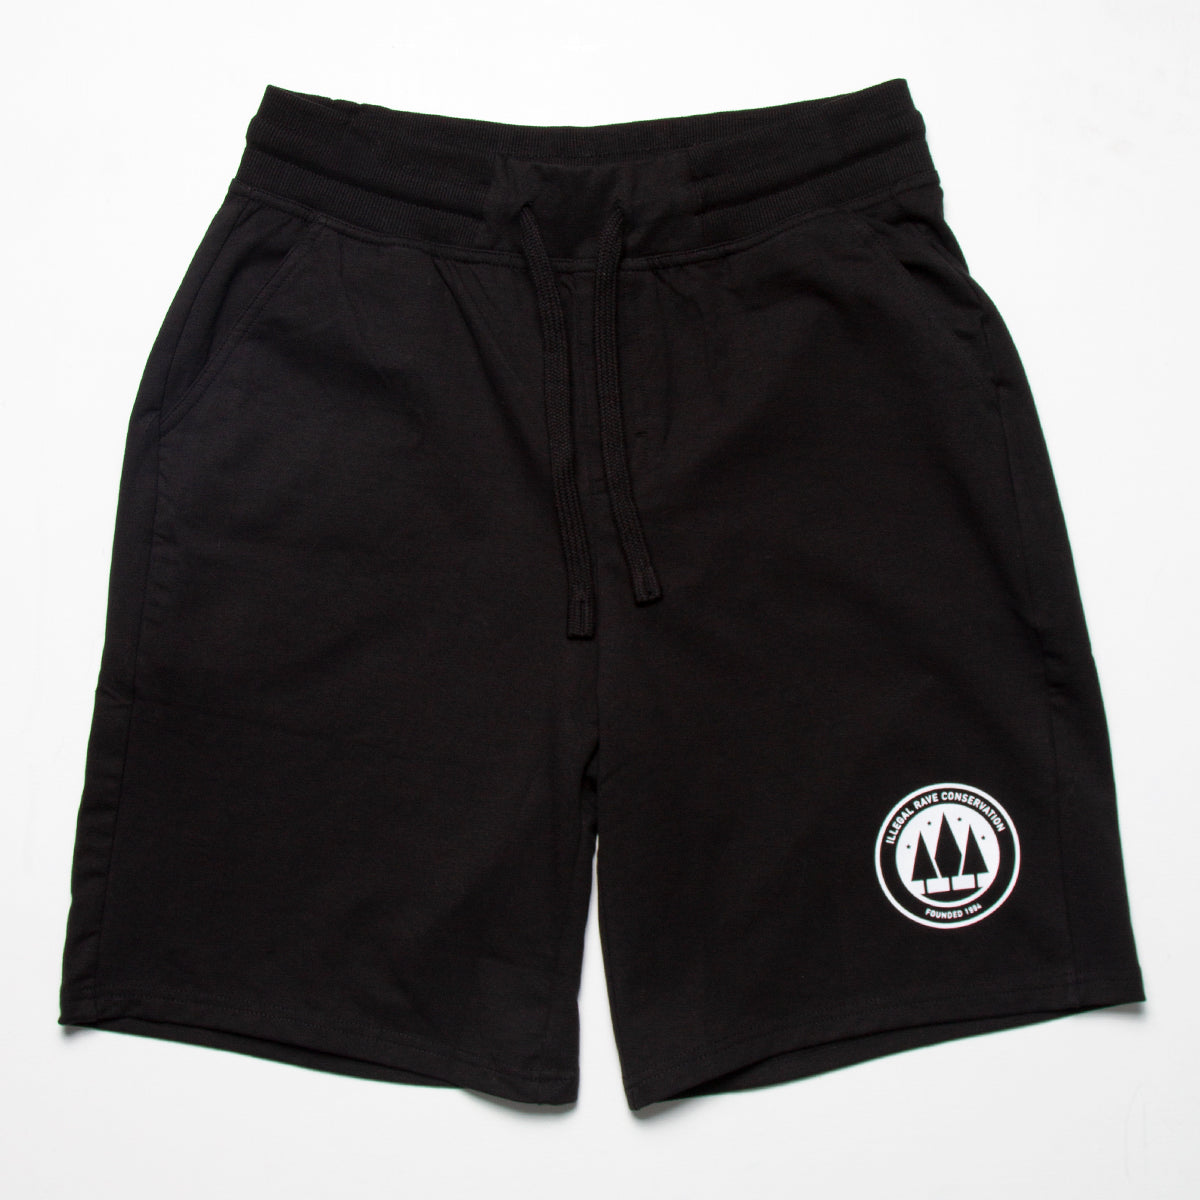 Illegal Rave Conservation - Jersey Shorts - Black - Wasted Heroes